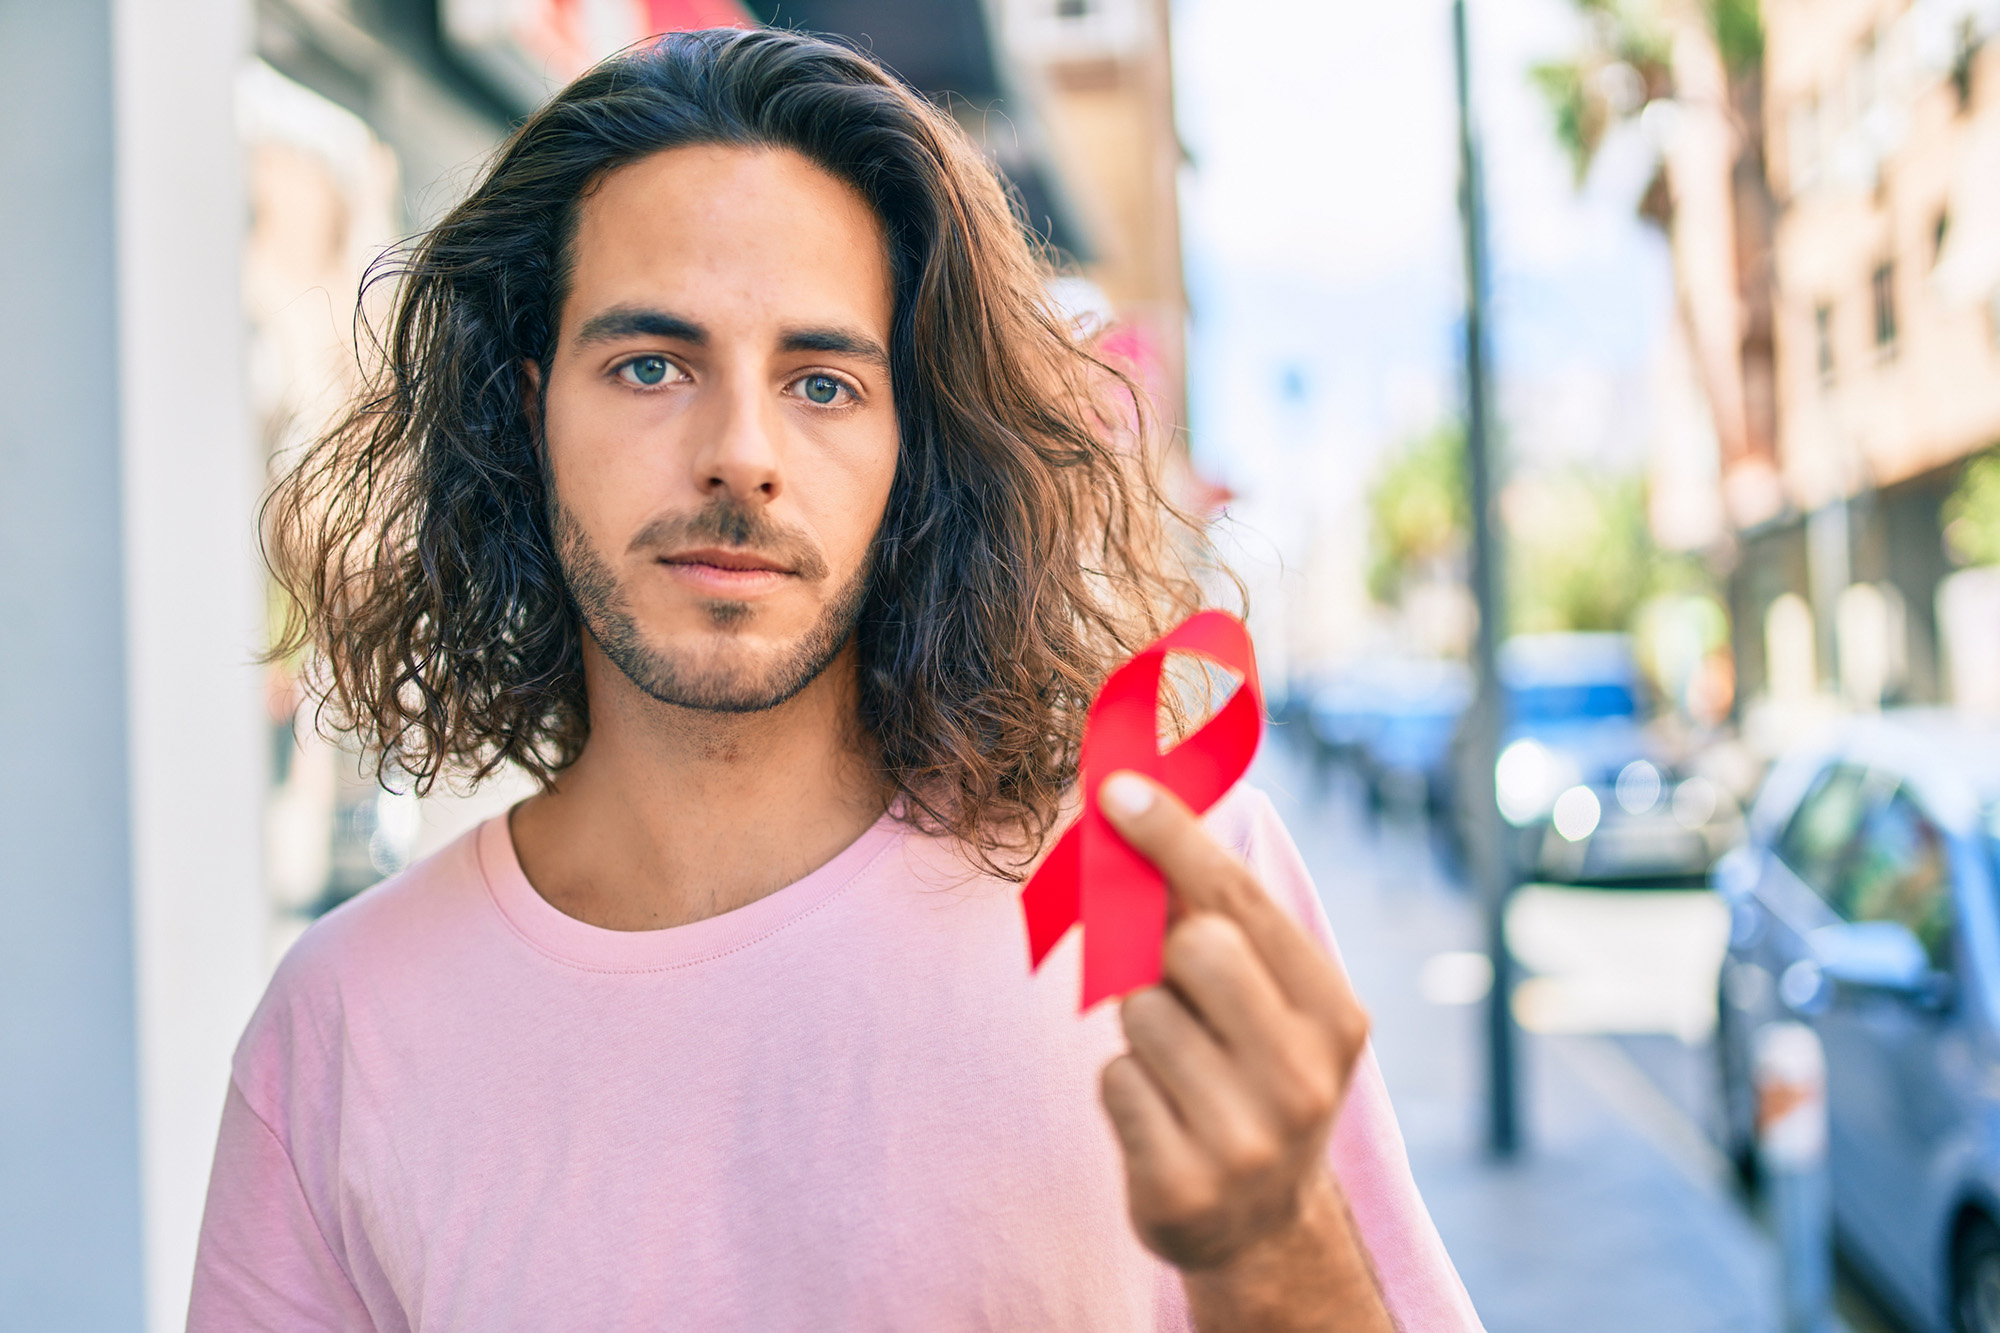 Young hispanic man with serious expression holding hiv awareness red ribbon at city.